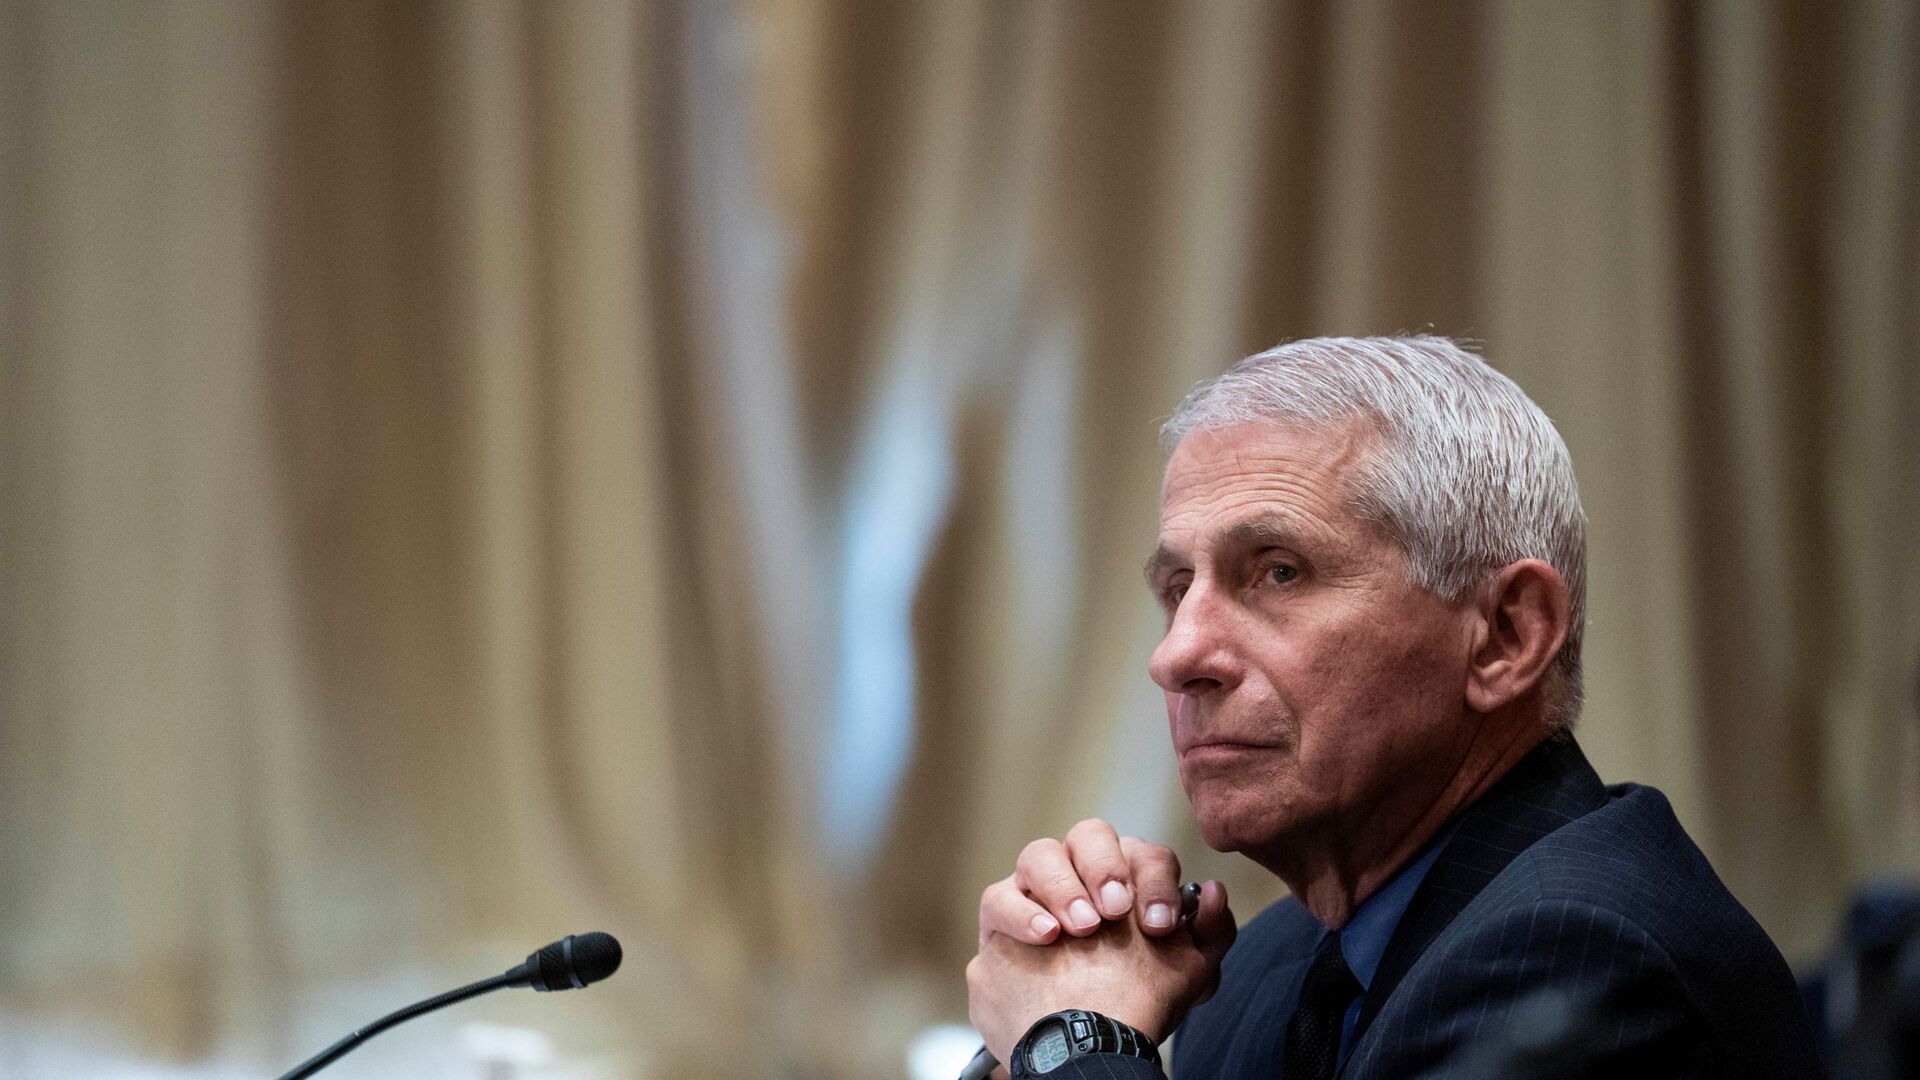 Dr. Anthony Fauci, director of the National Institute of Allergy and Infectious Diseases, listens during a Senate Appropriations Labor, Health and Human Services Subcommittee hearing looking into the budget estimates for National Institute of Health (NIH) and state of medical research on Capitol Hill in Washington, U.S., May 26, 2021. - Sputnik International, 1920, 11.01.2022